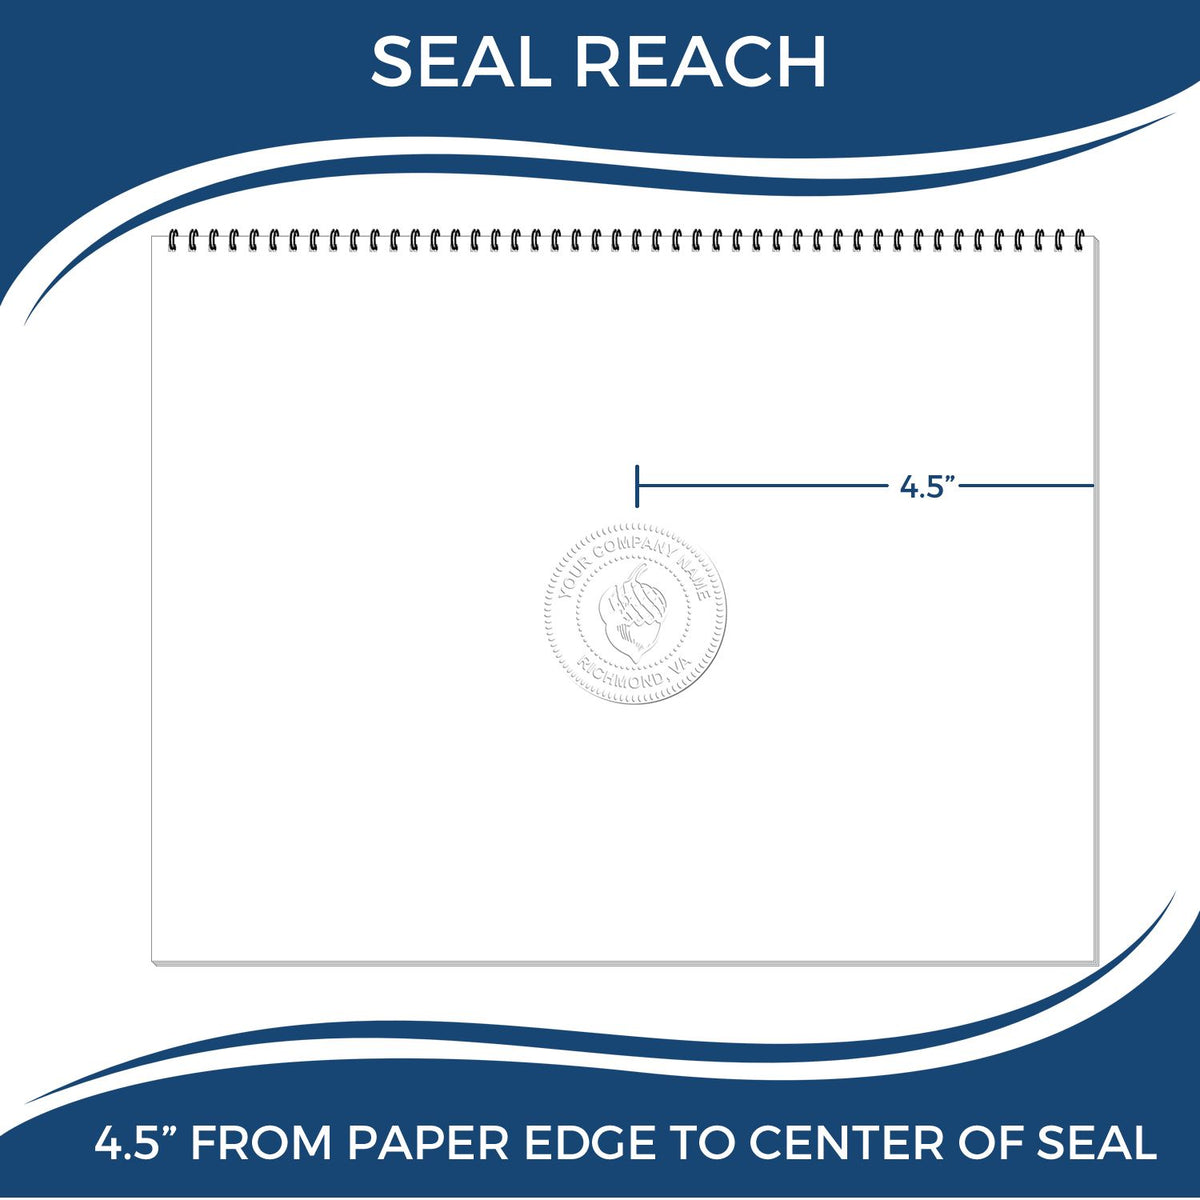 An infographic showing the seal reach which is represented by a ruler and a miniature seal image of the Extended Long Reach Connecticut Architect Seal Embosser